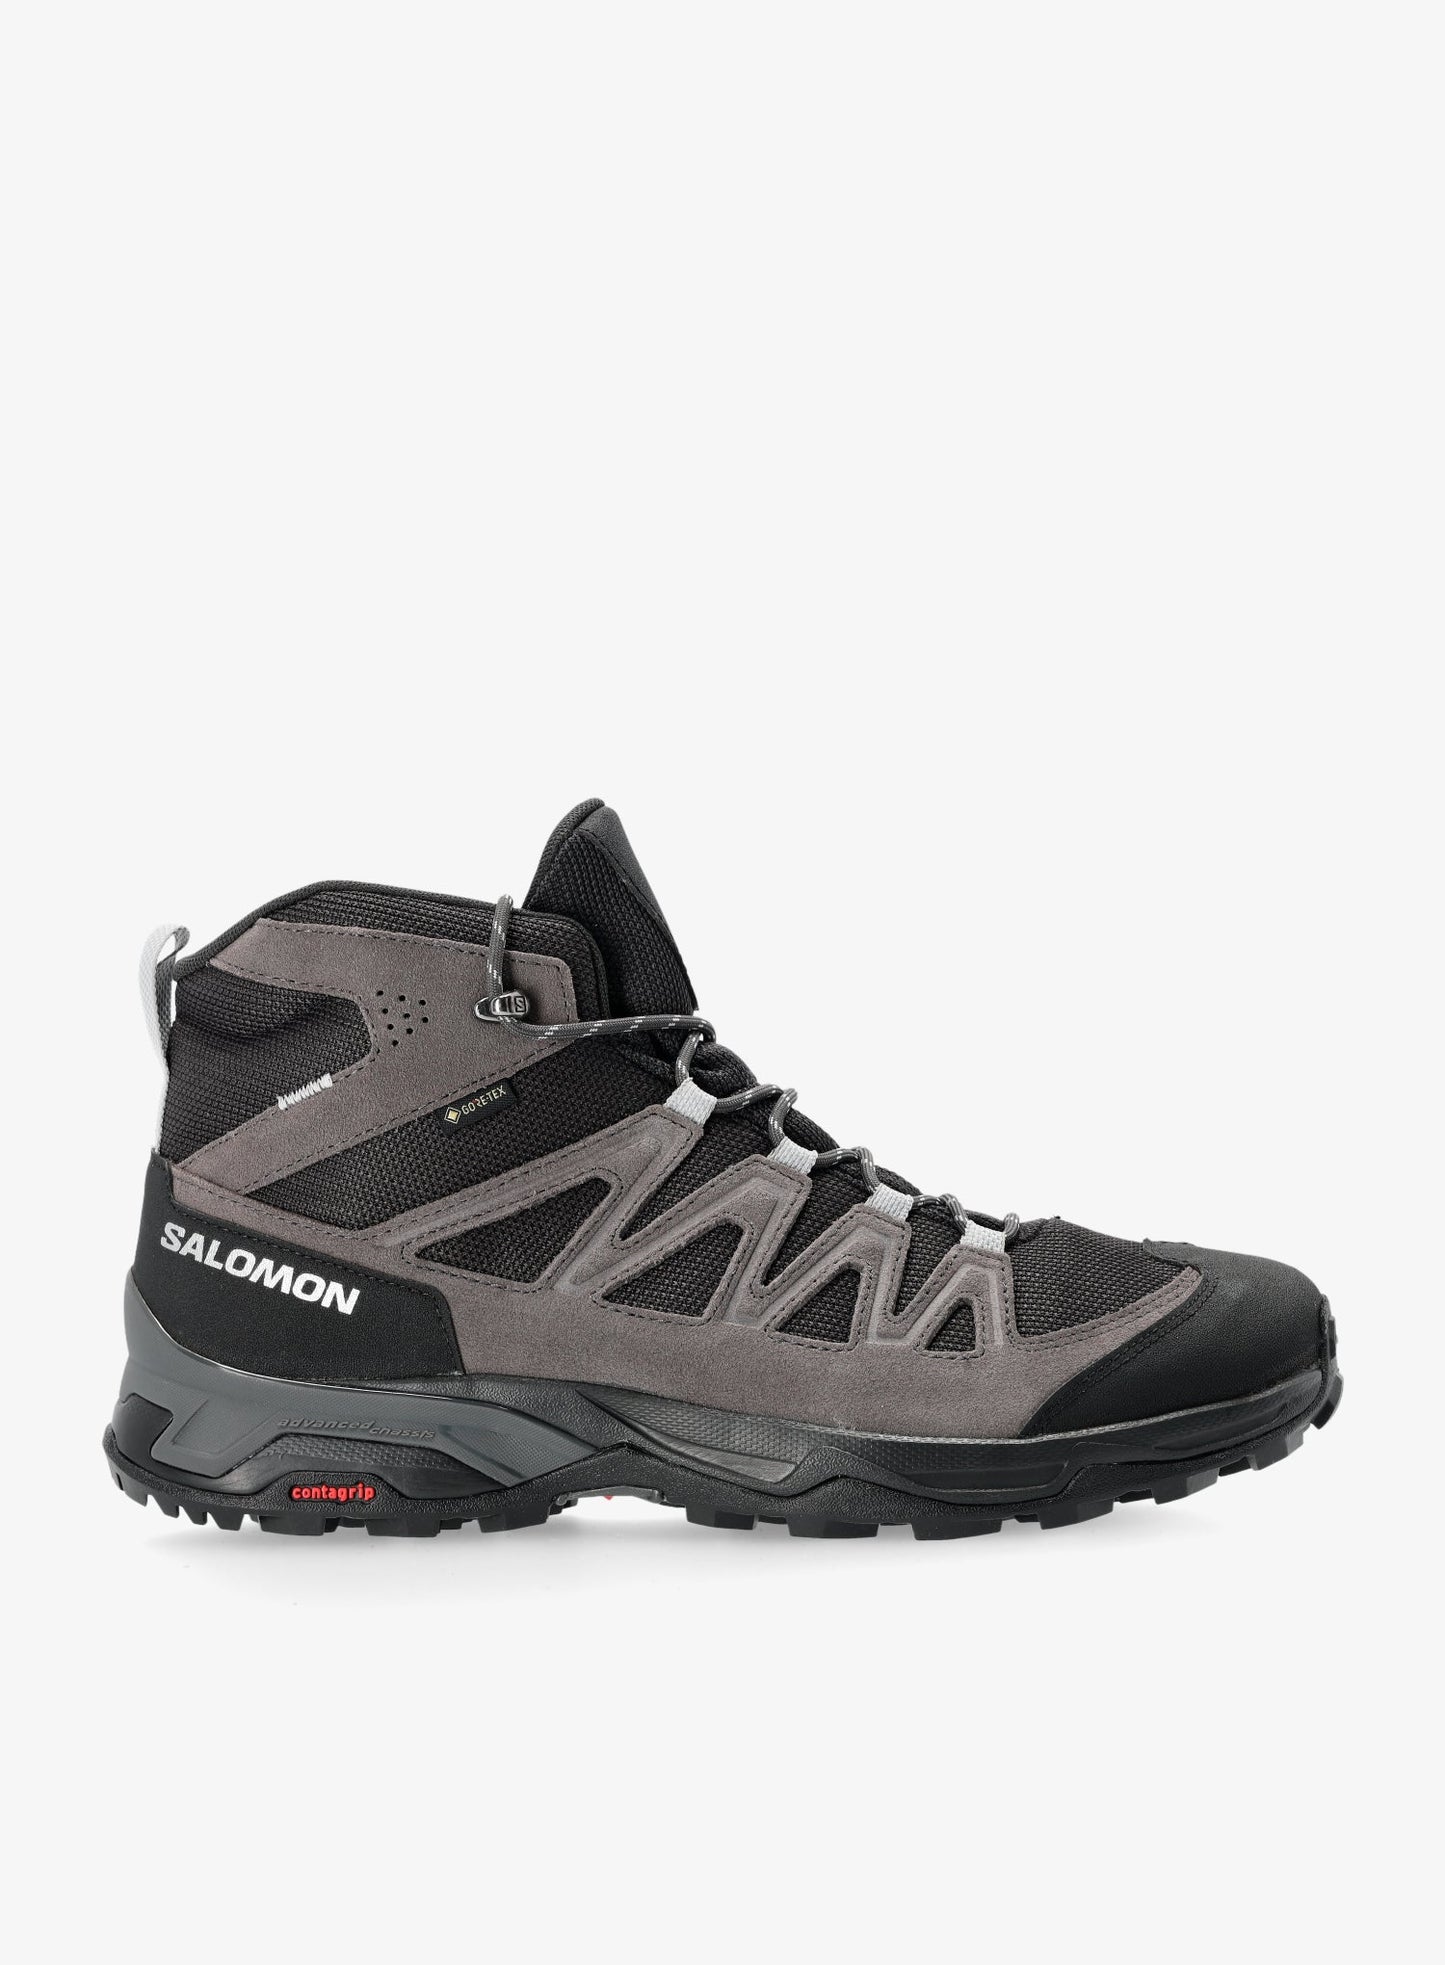 Salomon Men's Waterproof Gore-Tex Hiking Boots - Suede, Mid-Cut for Ultimate Stability